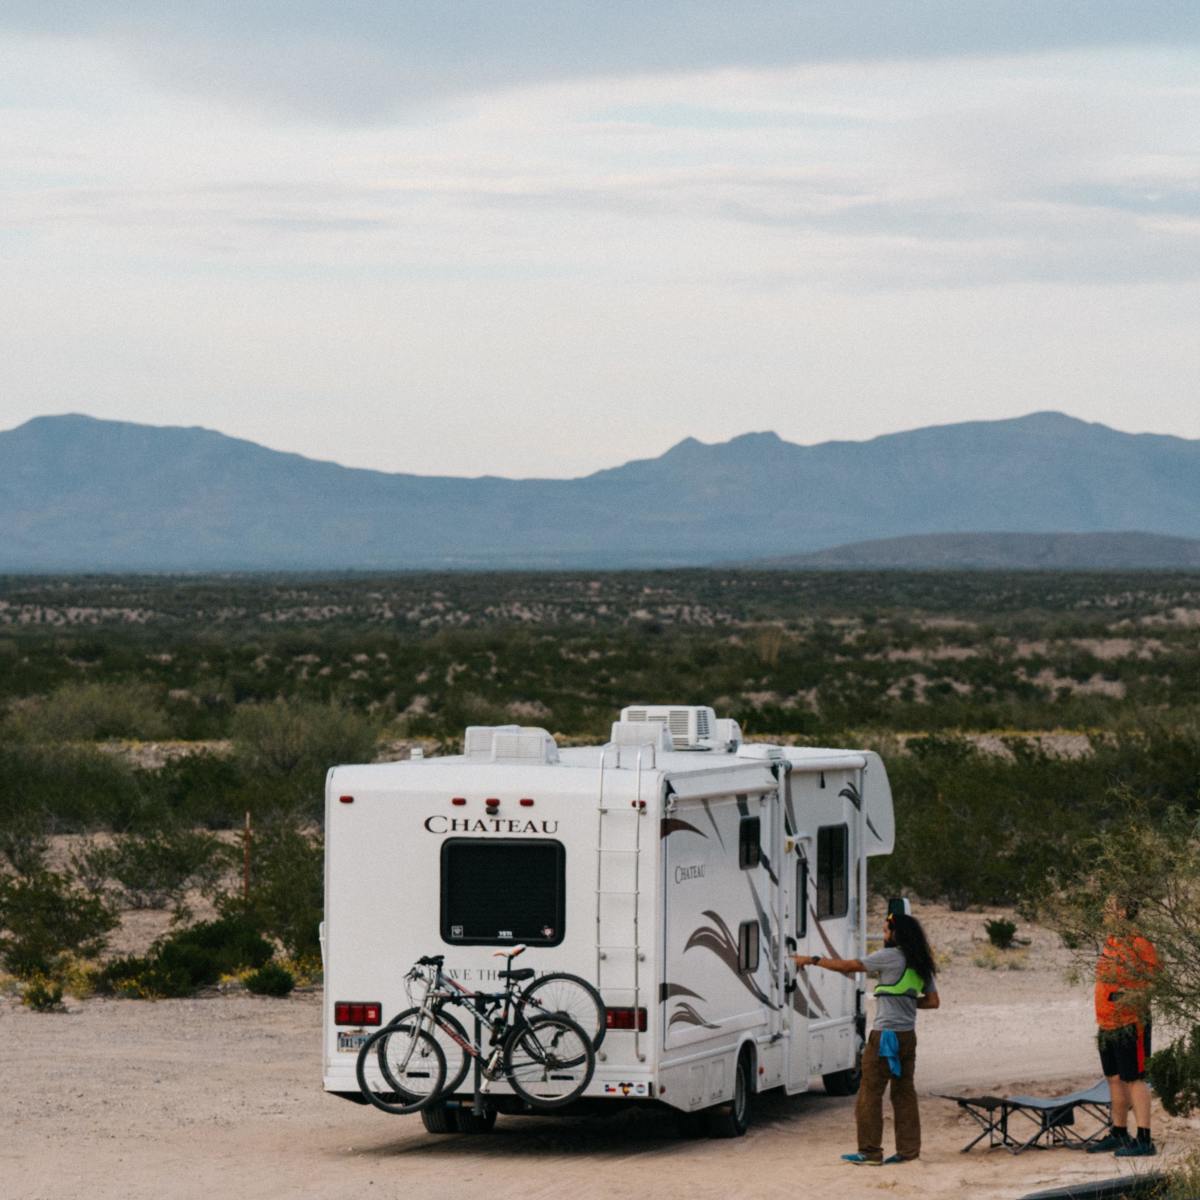 If you own a recreational vehicle, this article will show you several options for living totally rent-free all over the US.